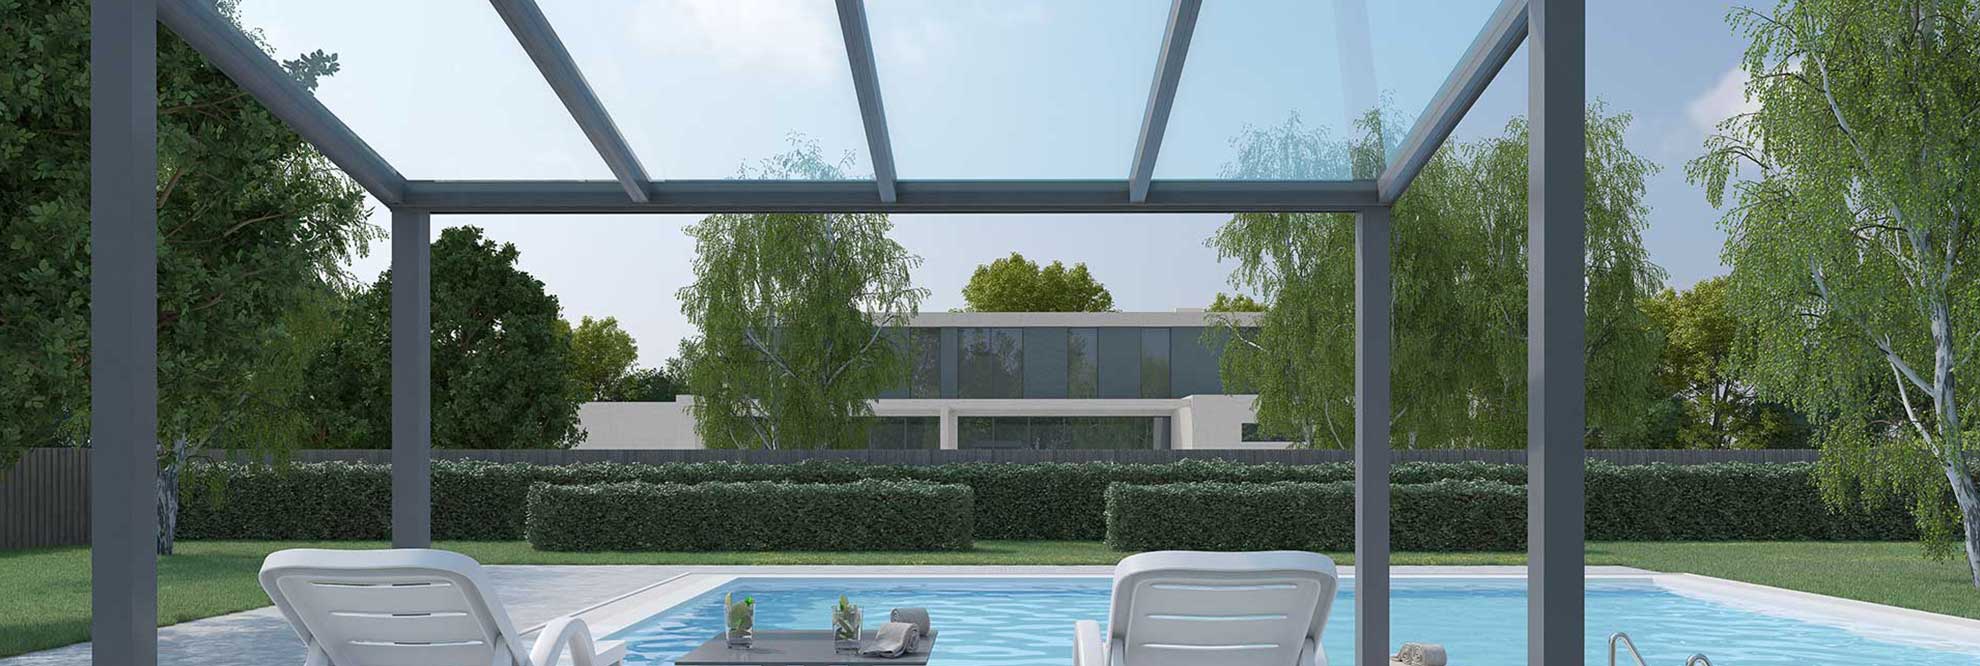 Sliding glass door pergolas shading sun loungers by the pool on a sunny day